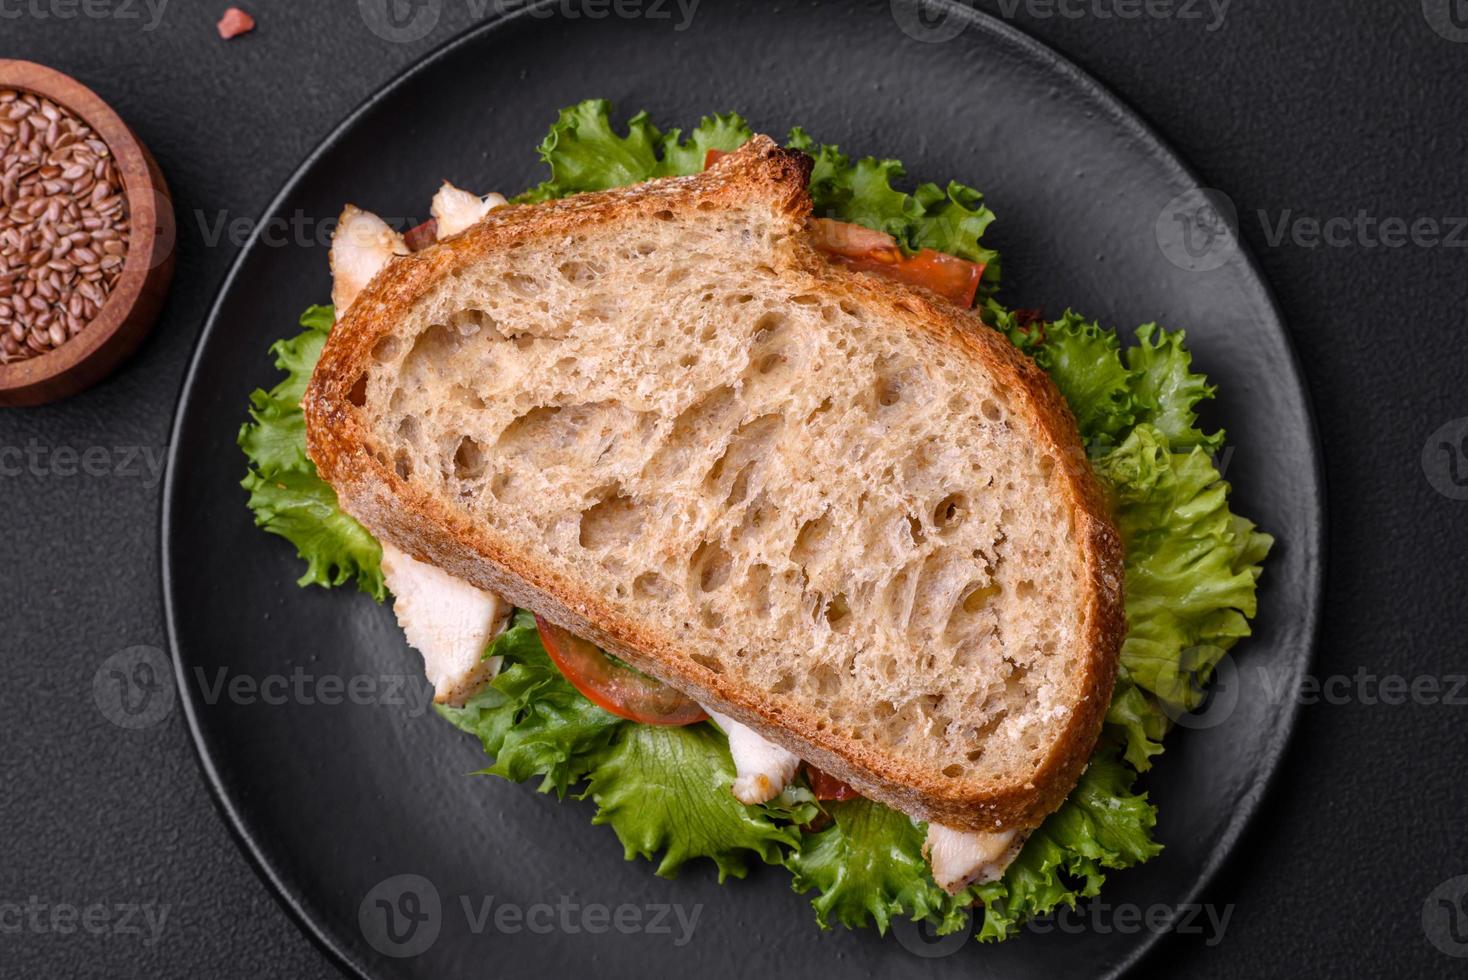 Fresh tasty sandwich with chicken, tomatoes and lettuce on a black plate photo